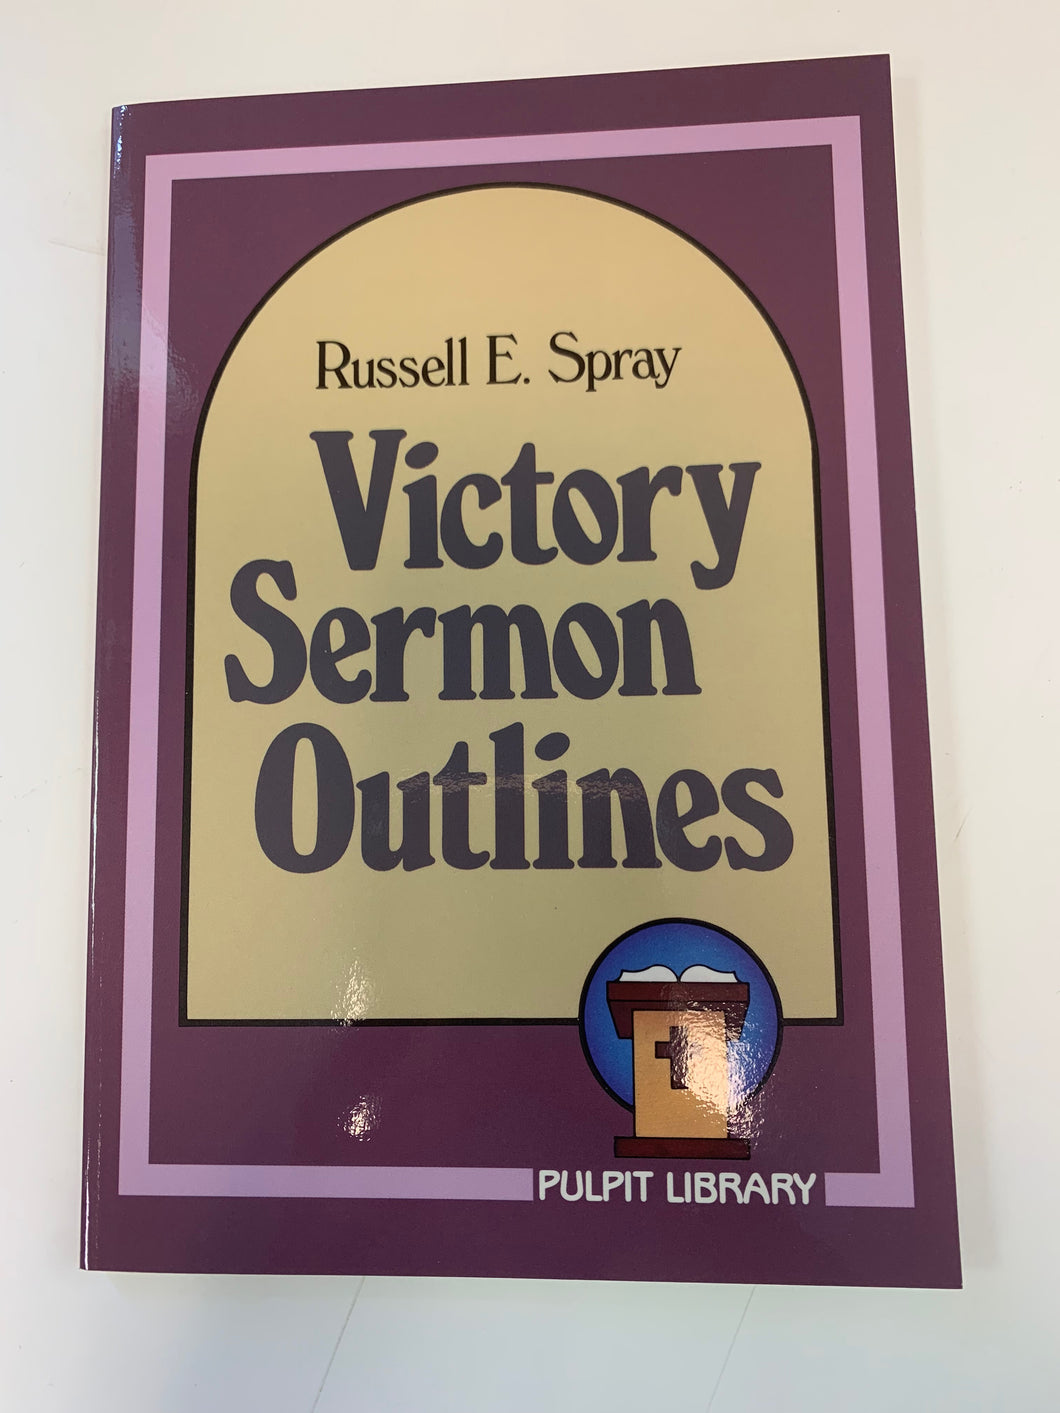 Victory Sermon Outlines by Russell E. Spray